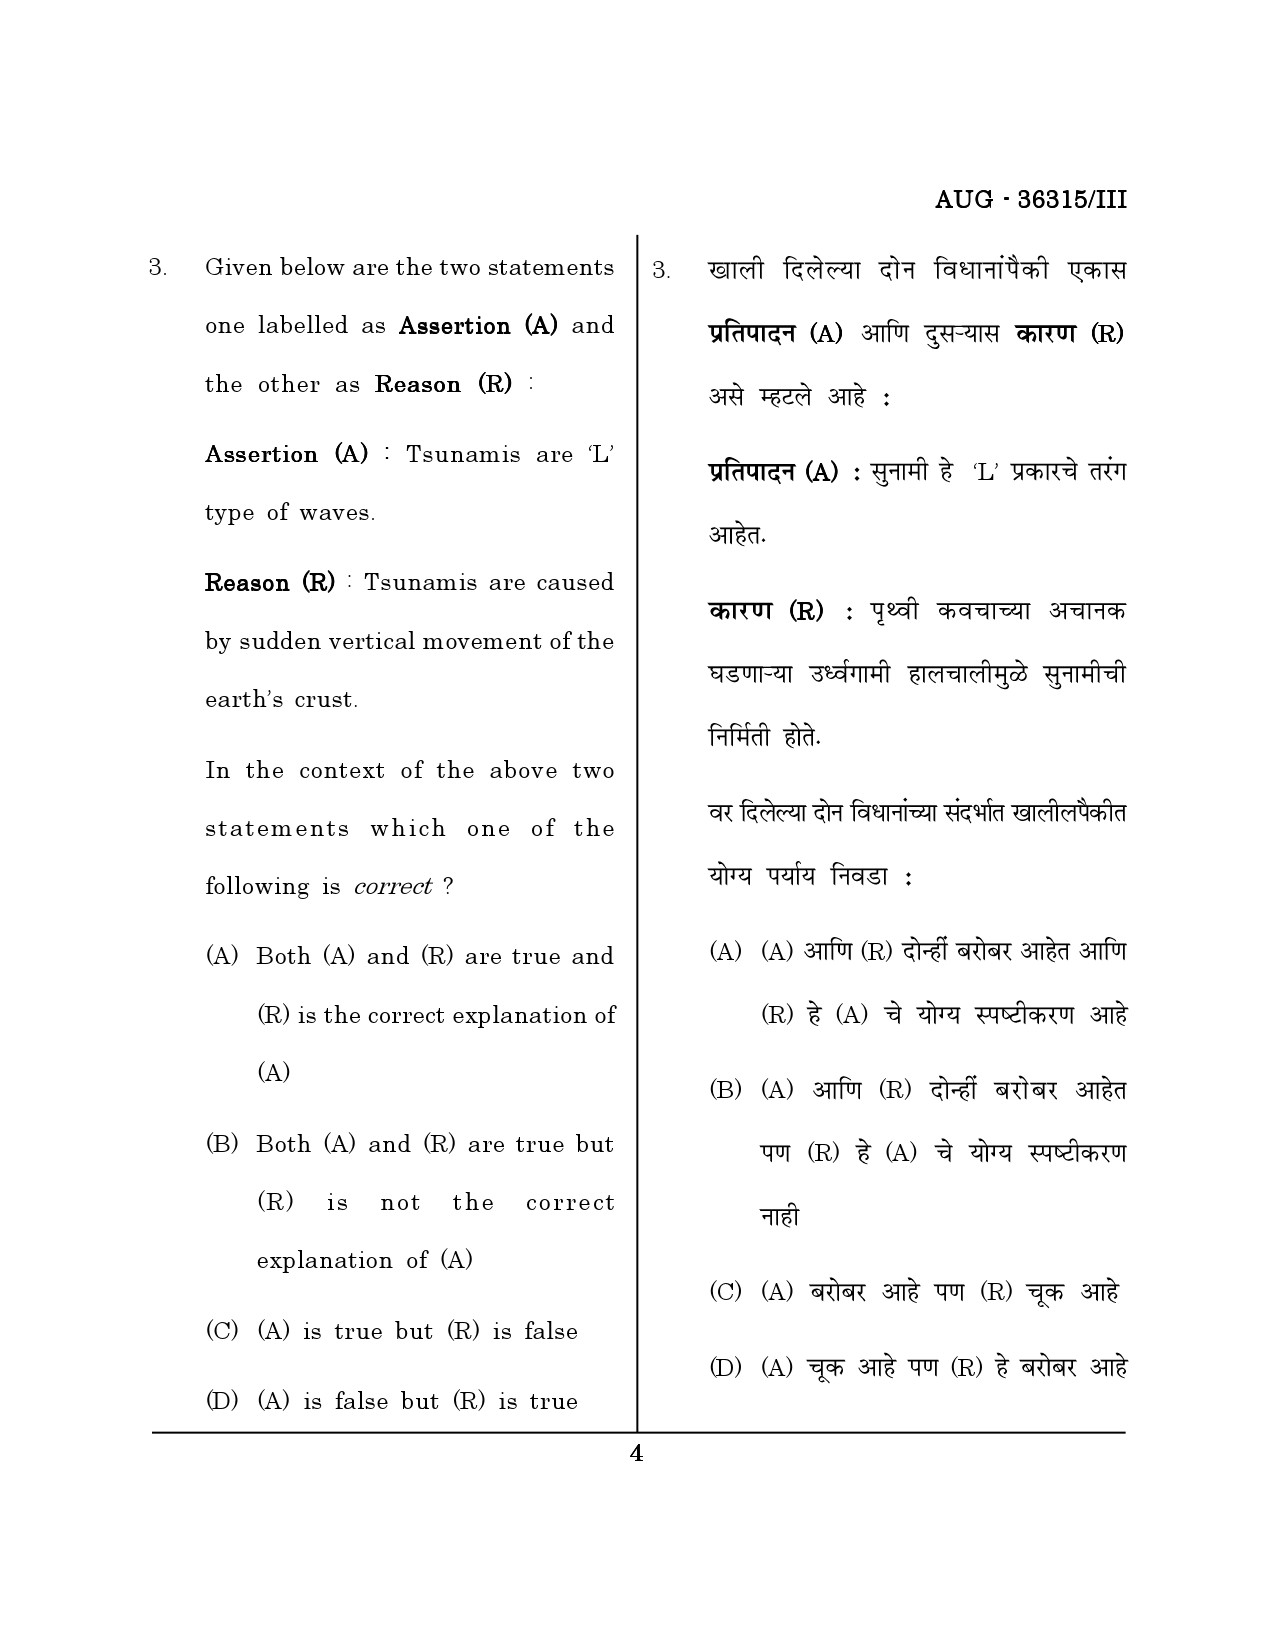 Maharashtra SET Geography Question Paper III August 2015 3